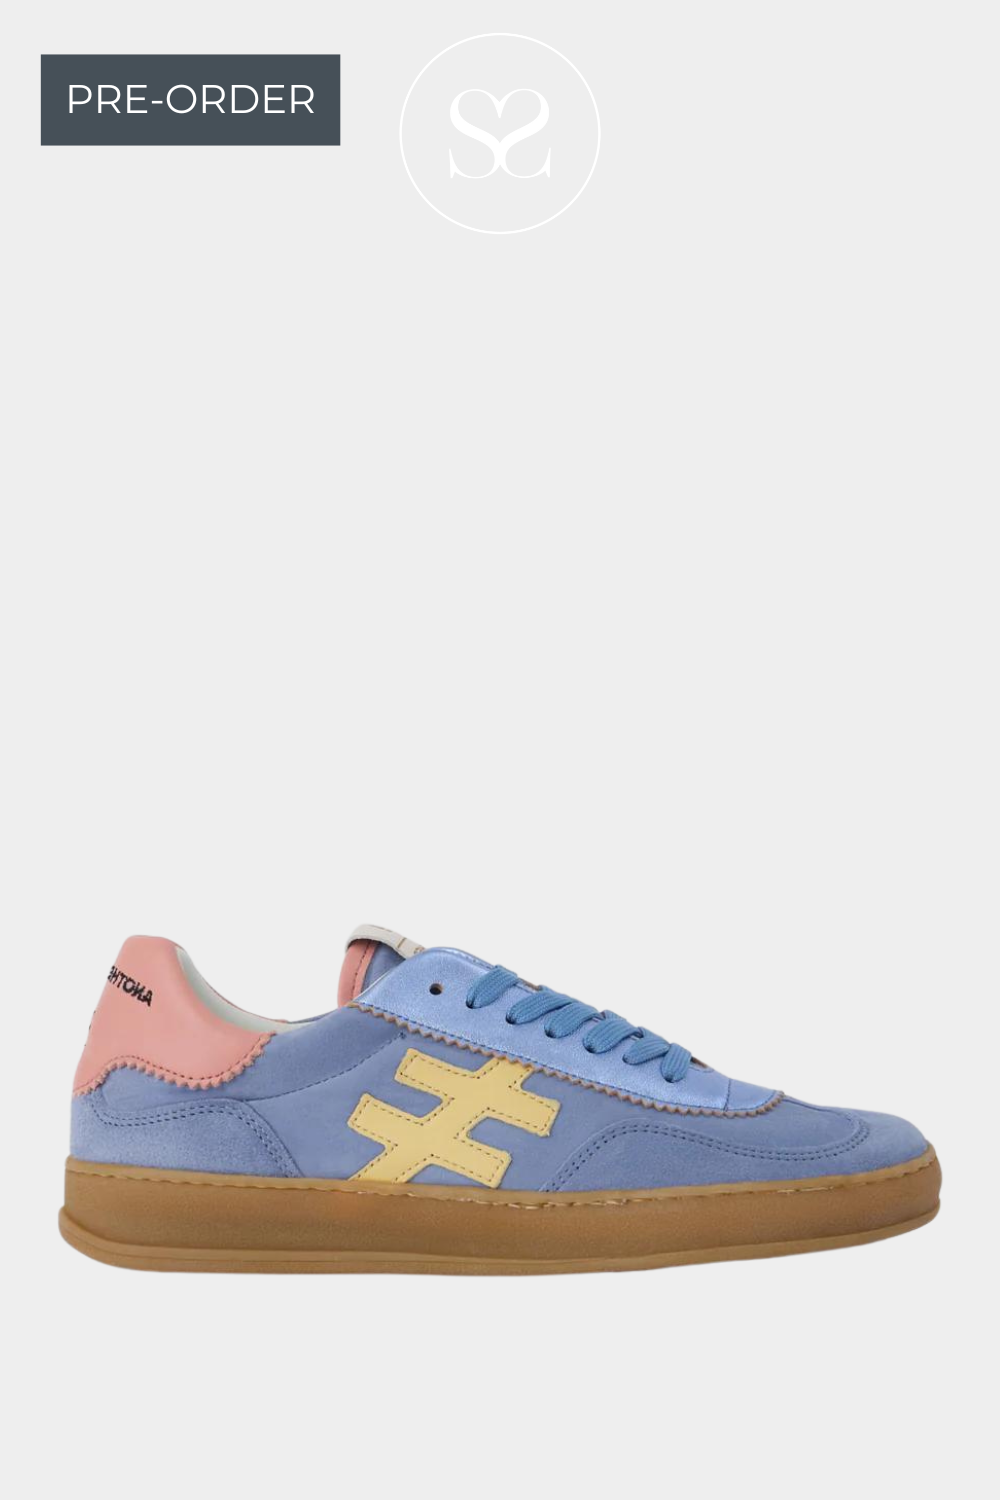 ANOTHER TREND ICONIC BLUE AND BABY PINK LEATHER TRAINER